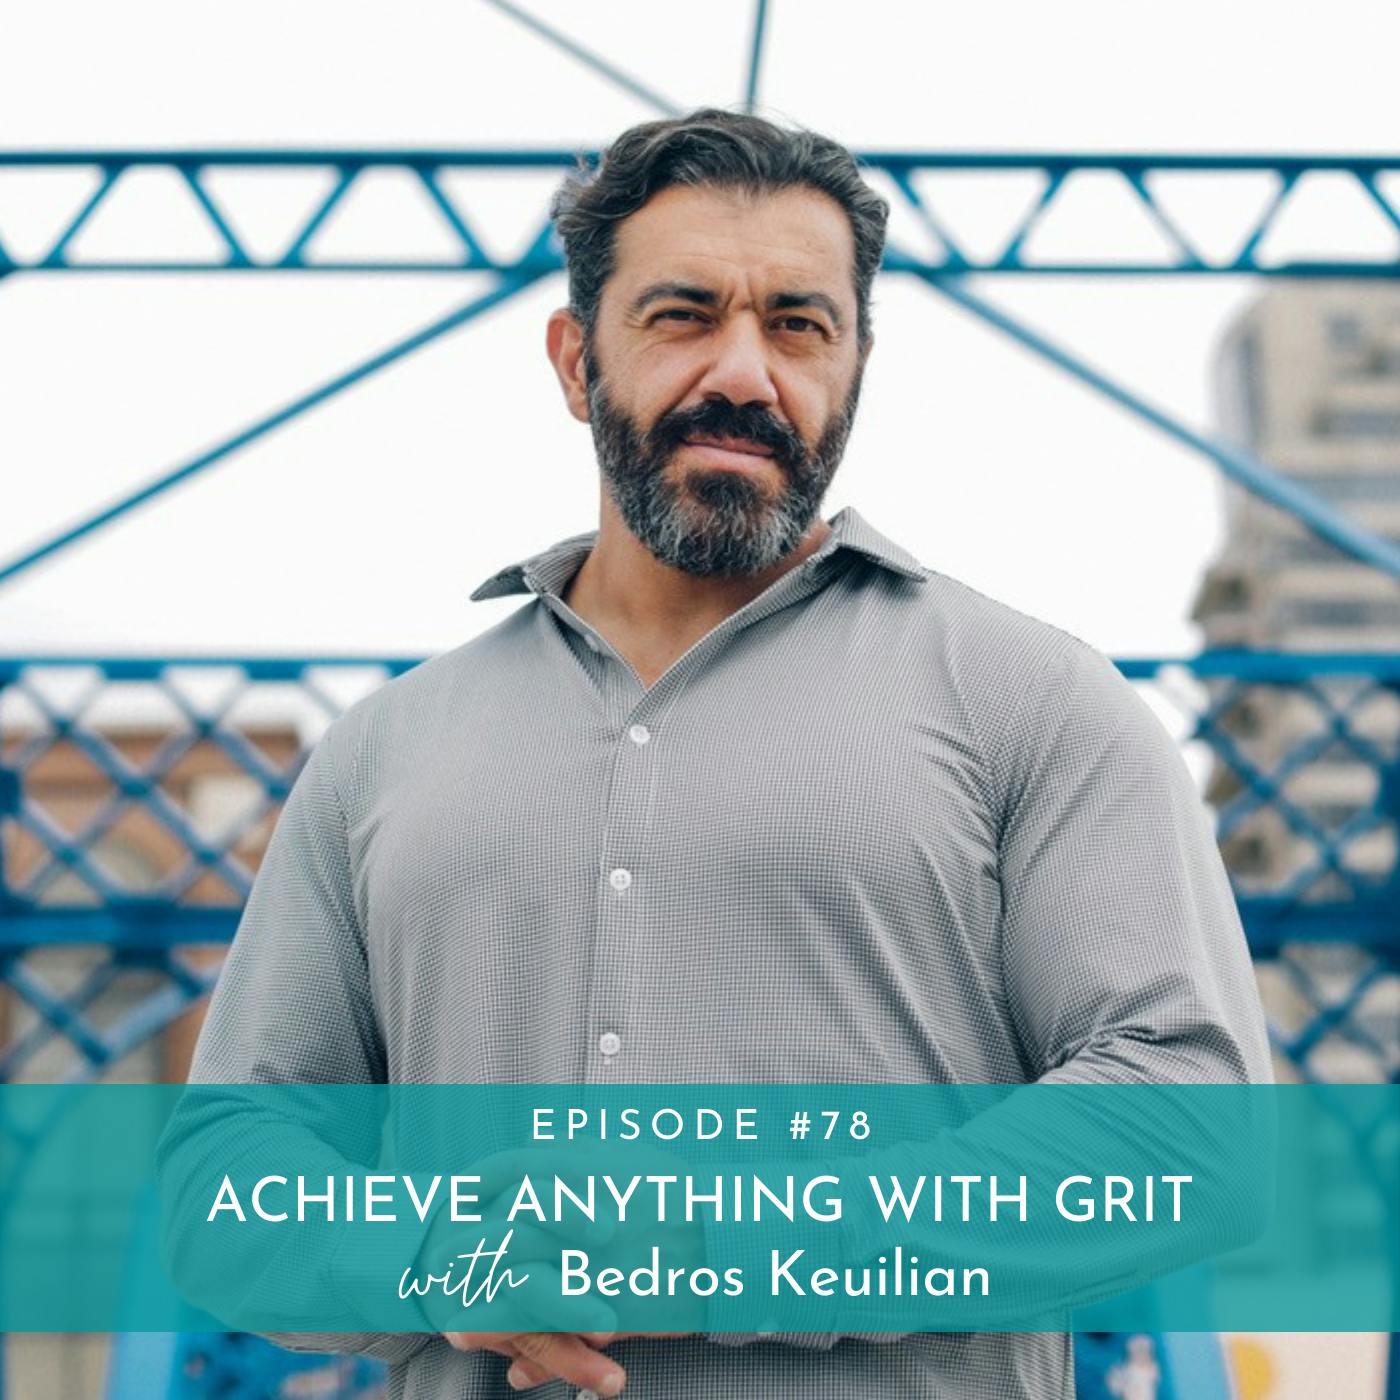 The Power of Resilience: Achieve Anything with Grit with Bedros Keuilian